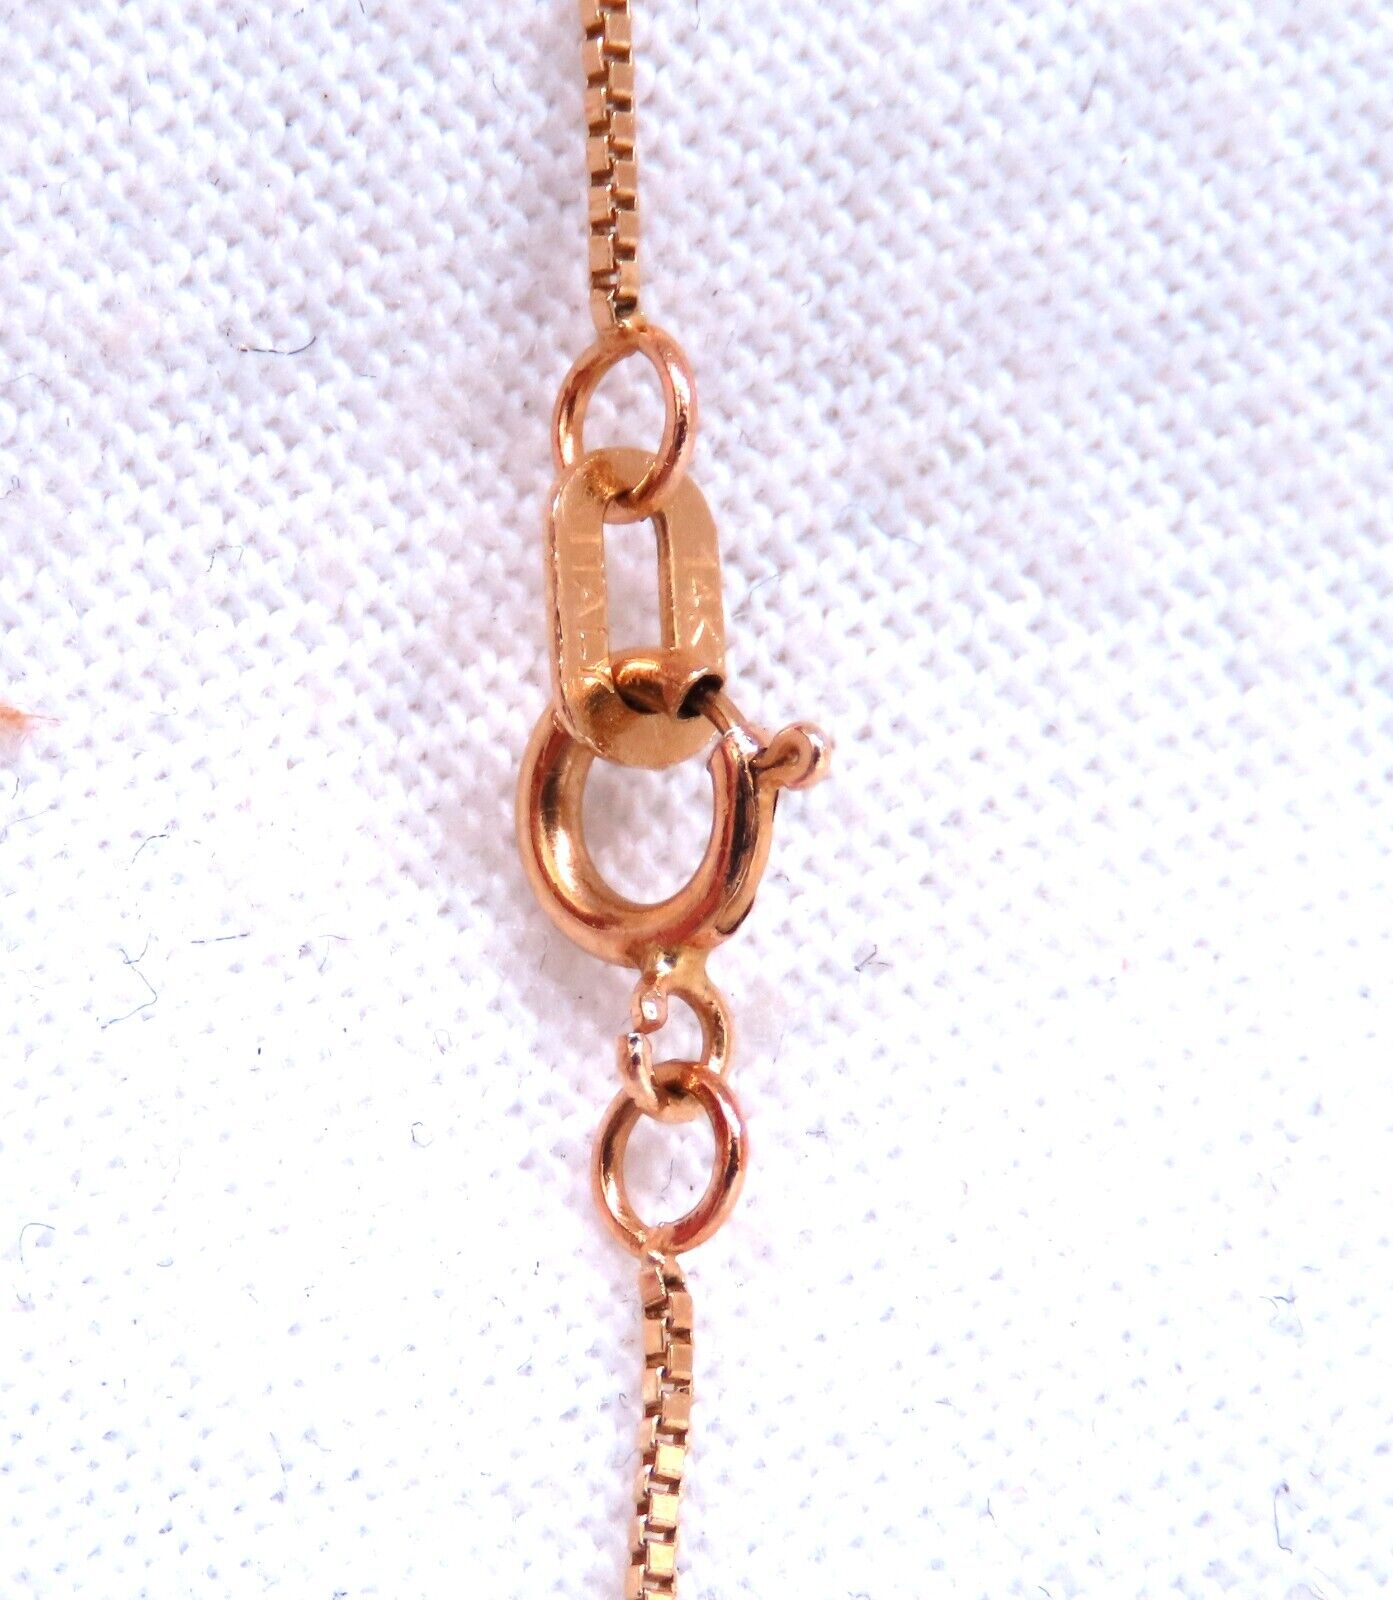 Statement "Perfect" Necklace Pendant 14kt Gold